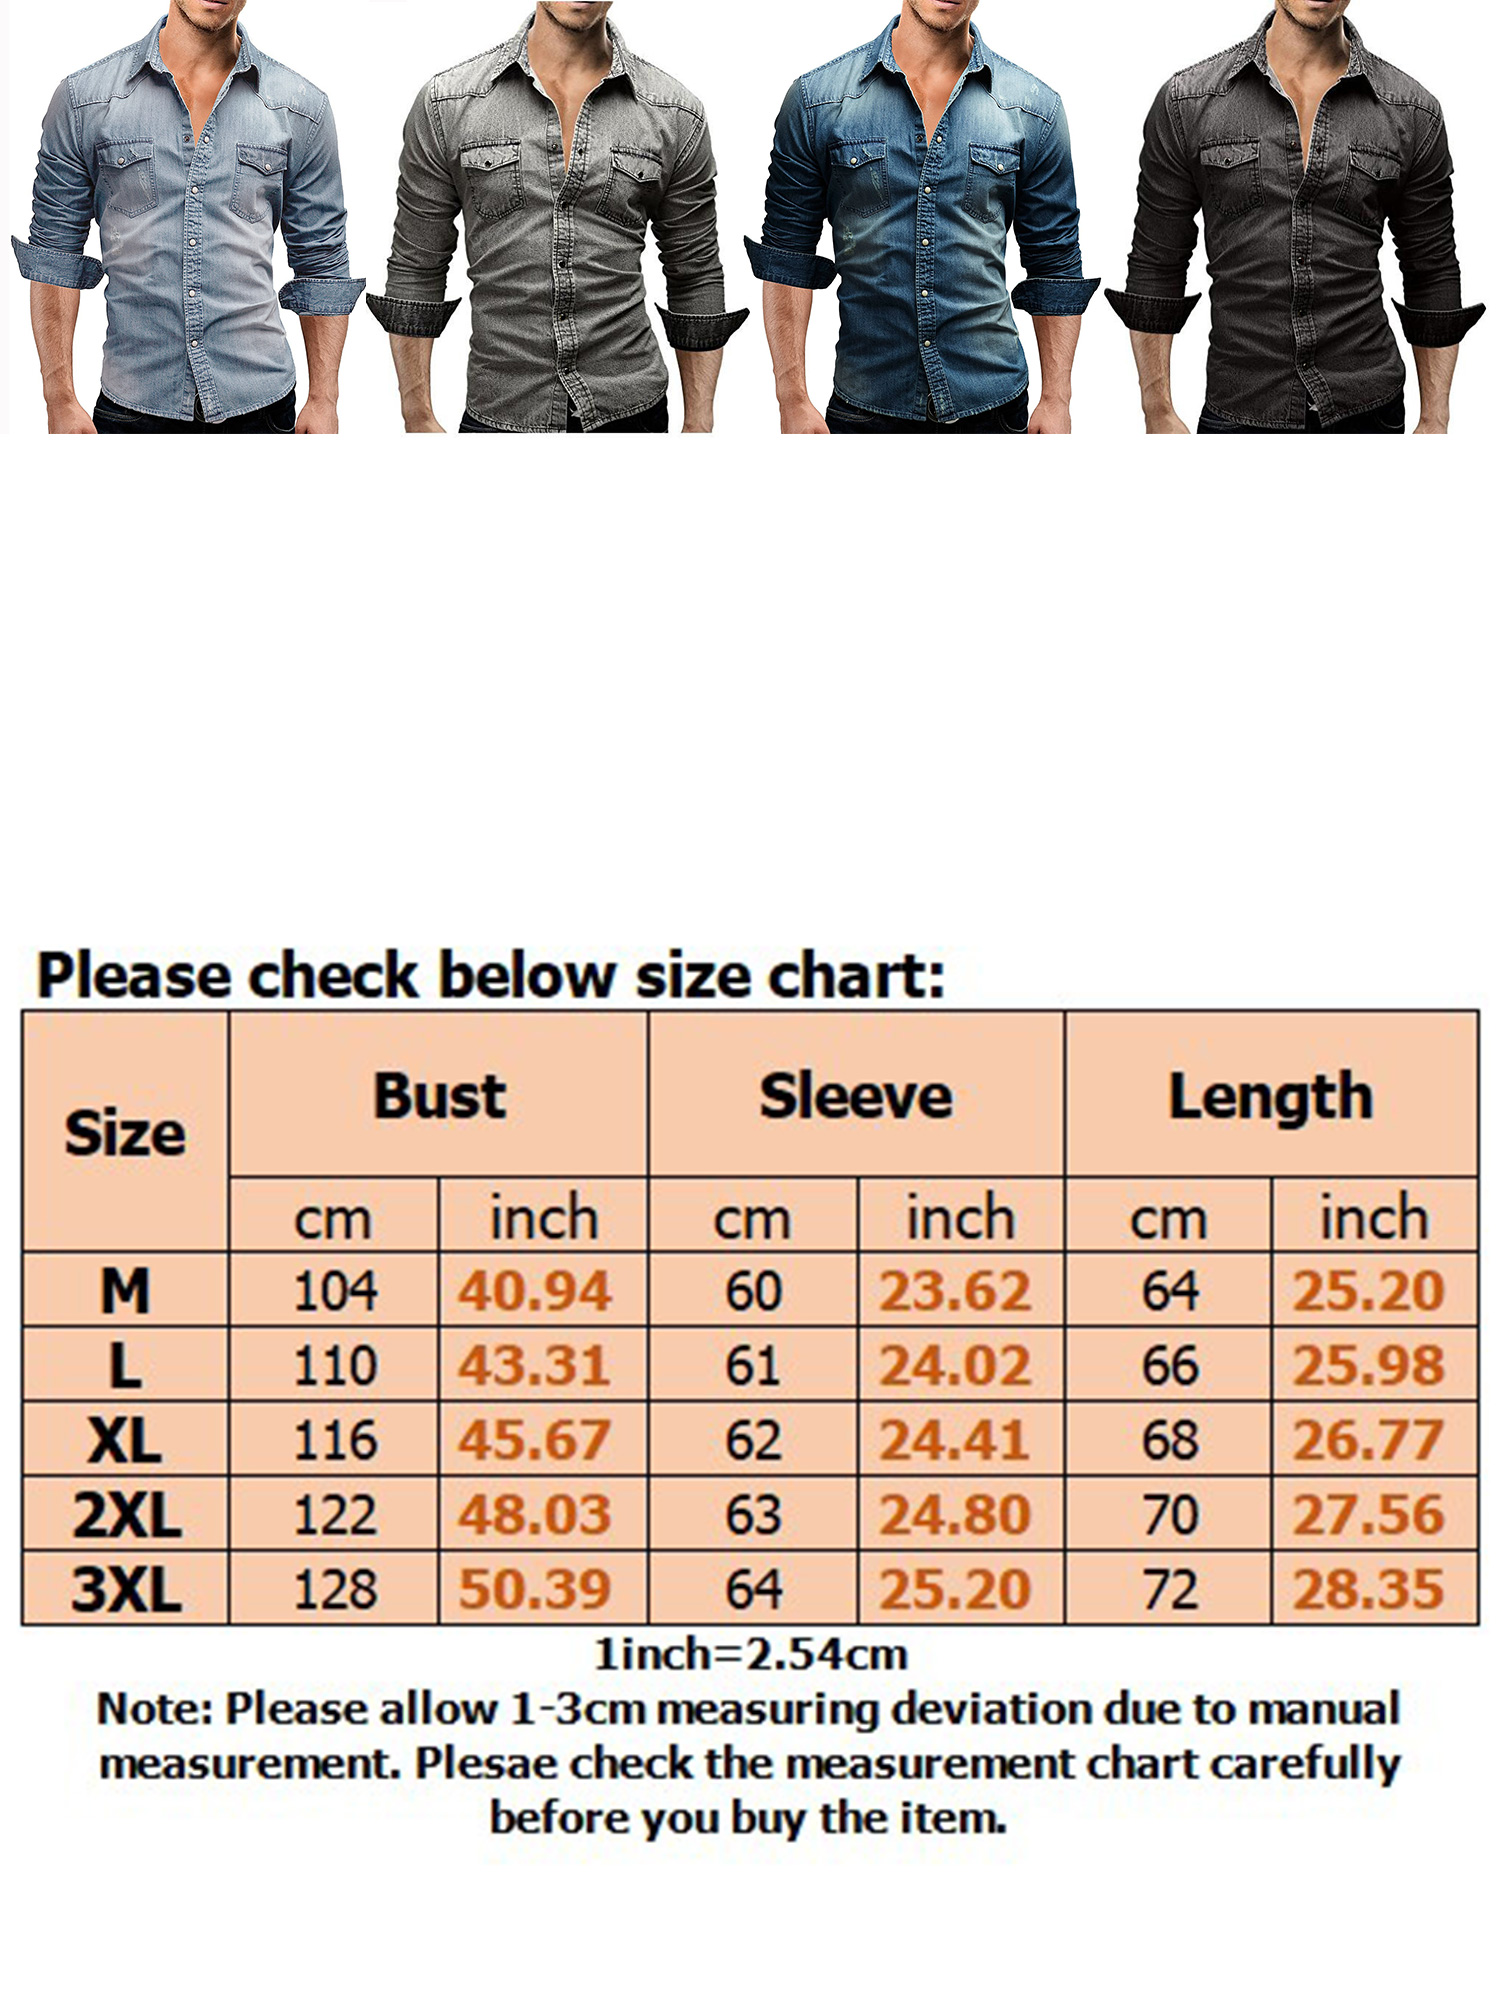 Men's Essential Button Down Dress Shirt Long Sleeve Washed Denim Shirt Lapel Casual Winter Tops - image 2 of 4